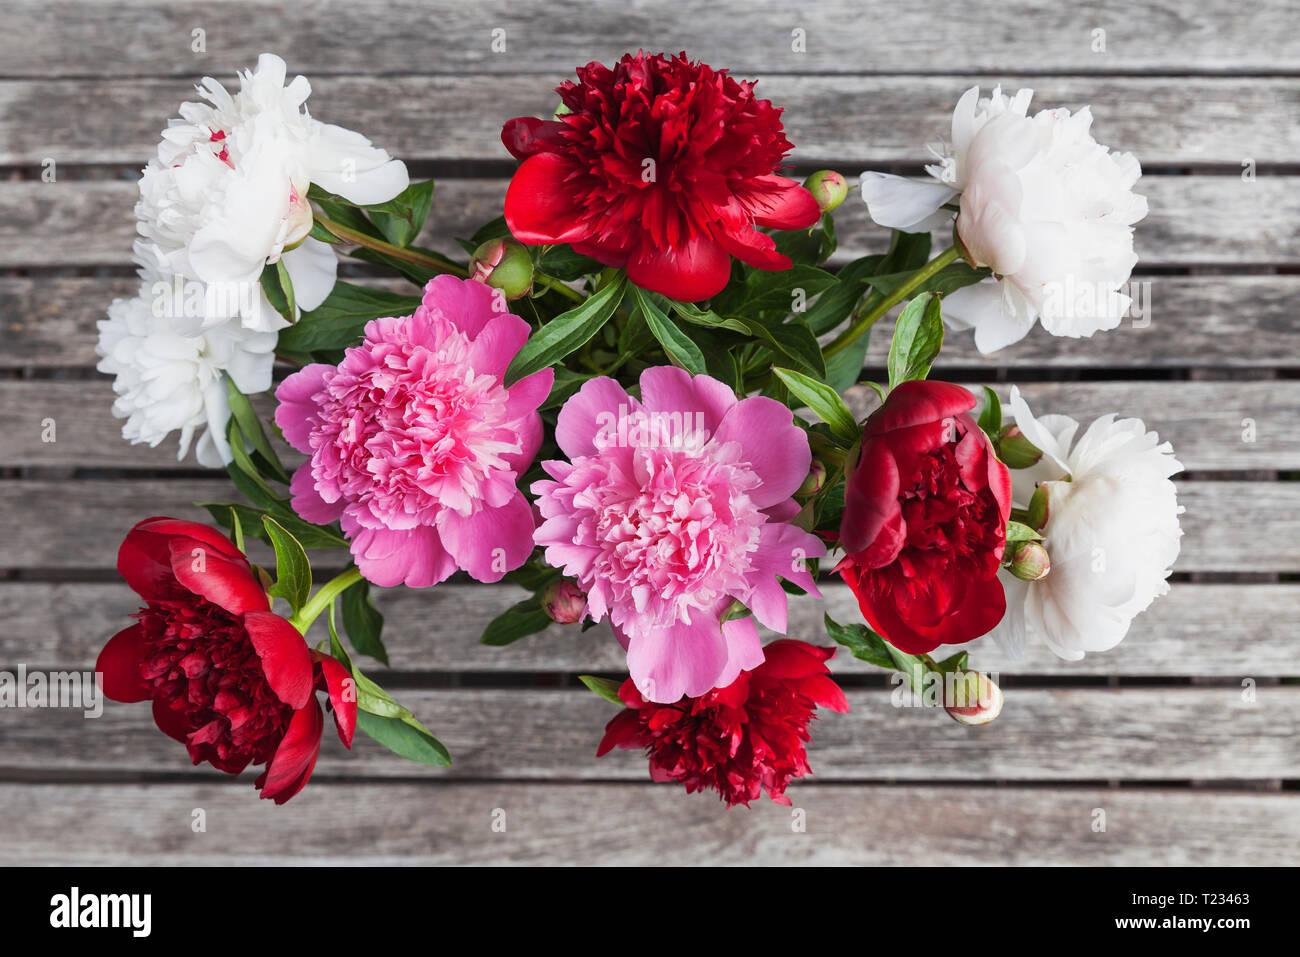 Bunch of white, red and pink Peonies Stock Photo